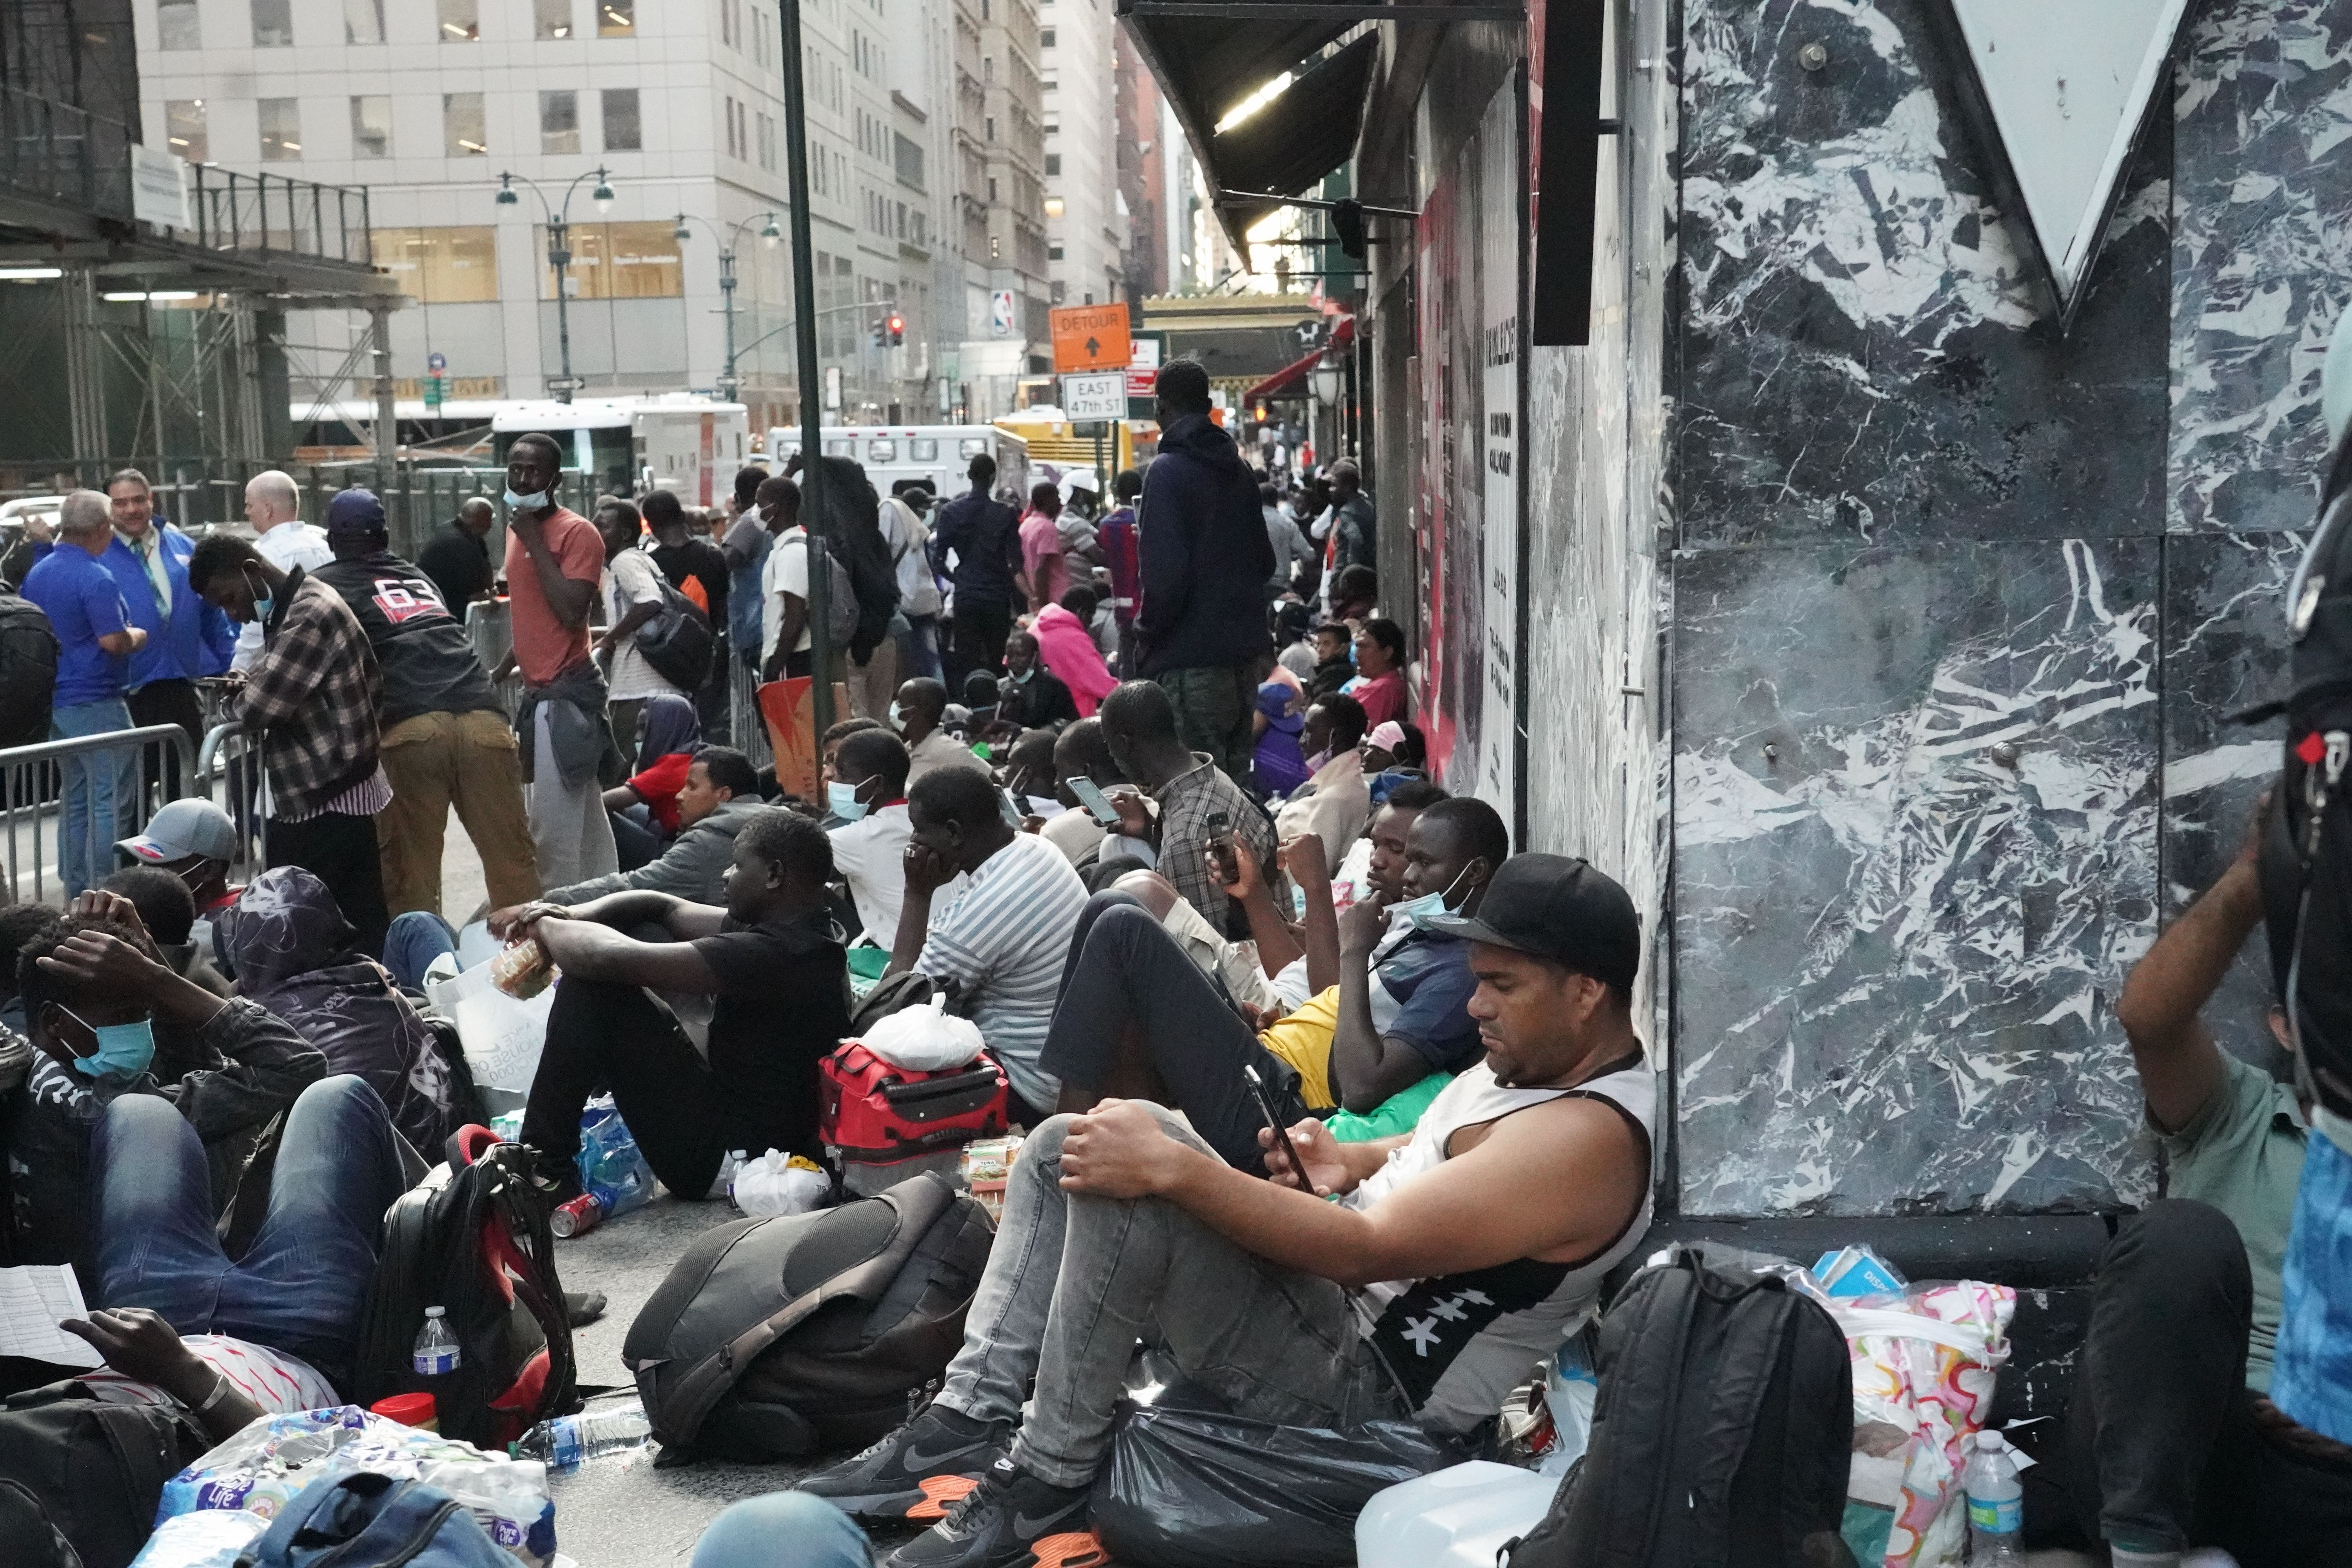 Undocumented Immigrants from West Africa, Mexico, and Venezuela camp outside the Roosevelt Hotel in New York City.